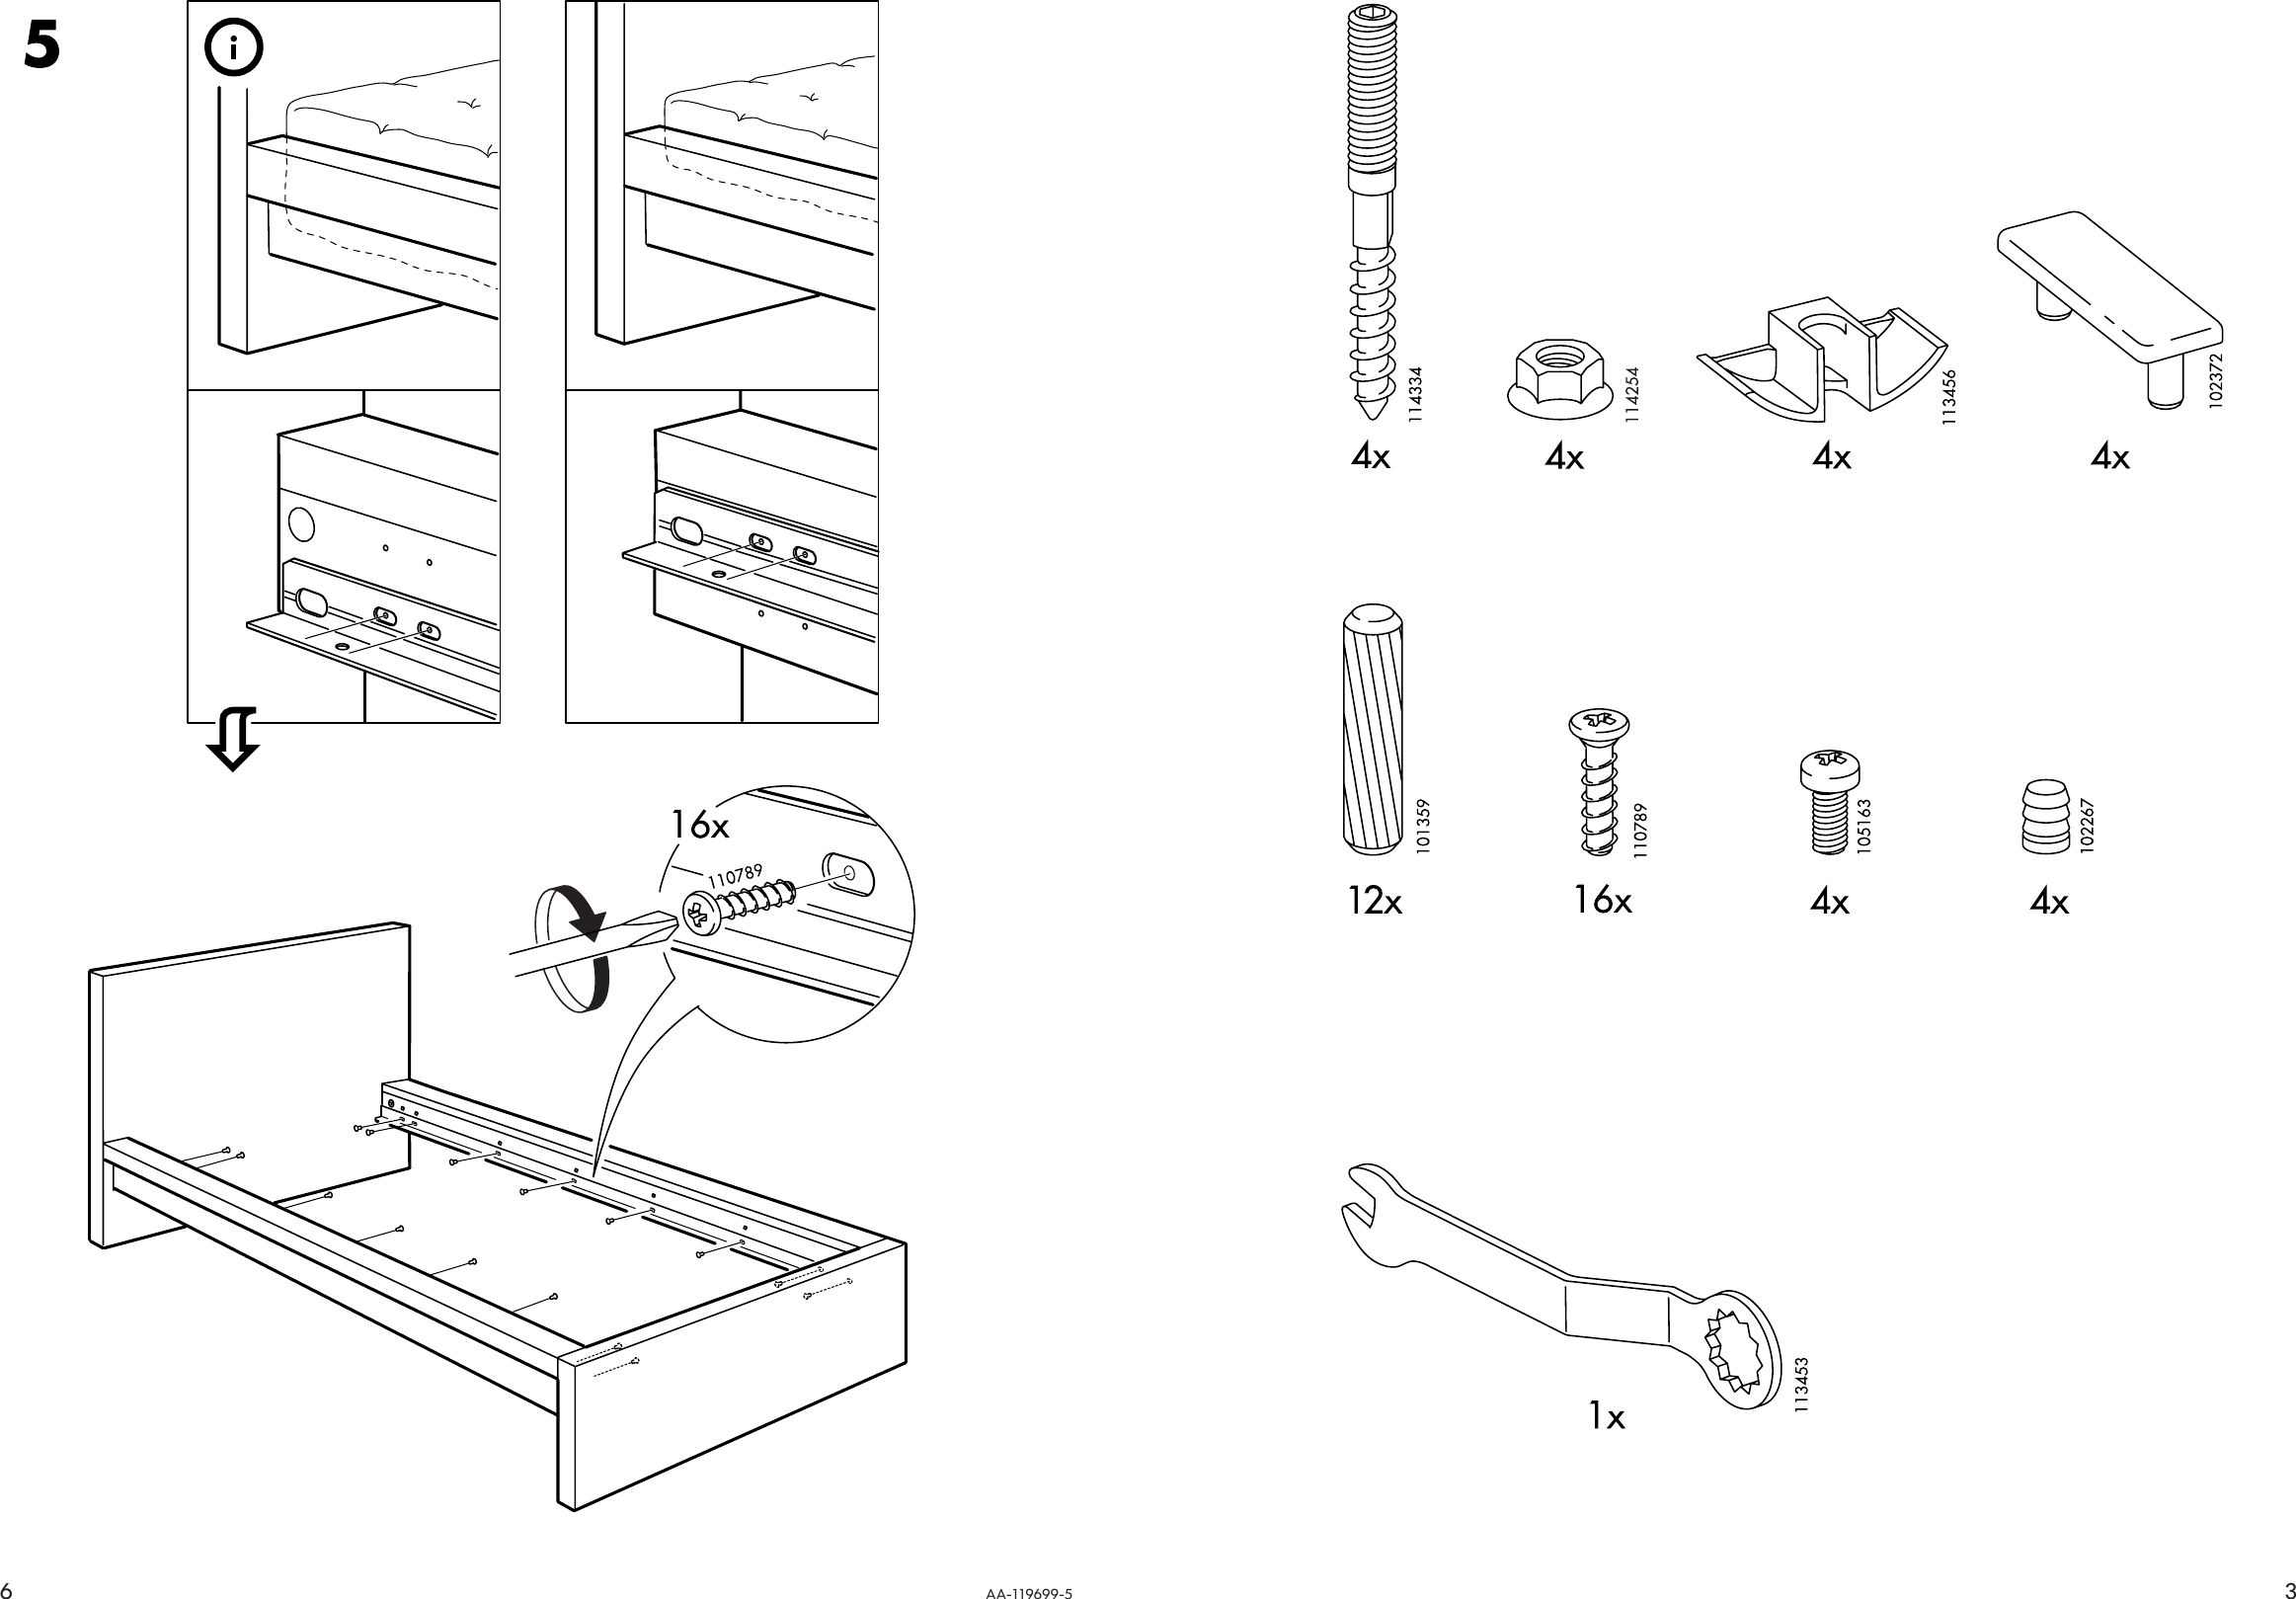 Ikea Malm Bed Frame Twin Assembly, Ikea Malm Full Size Bed Frame Instructions